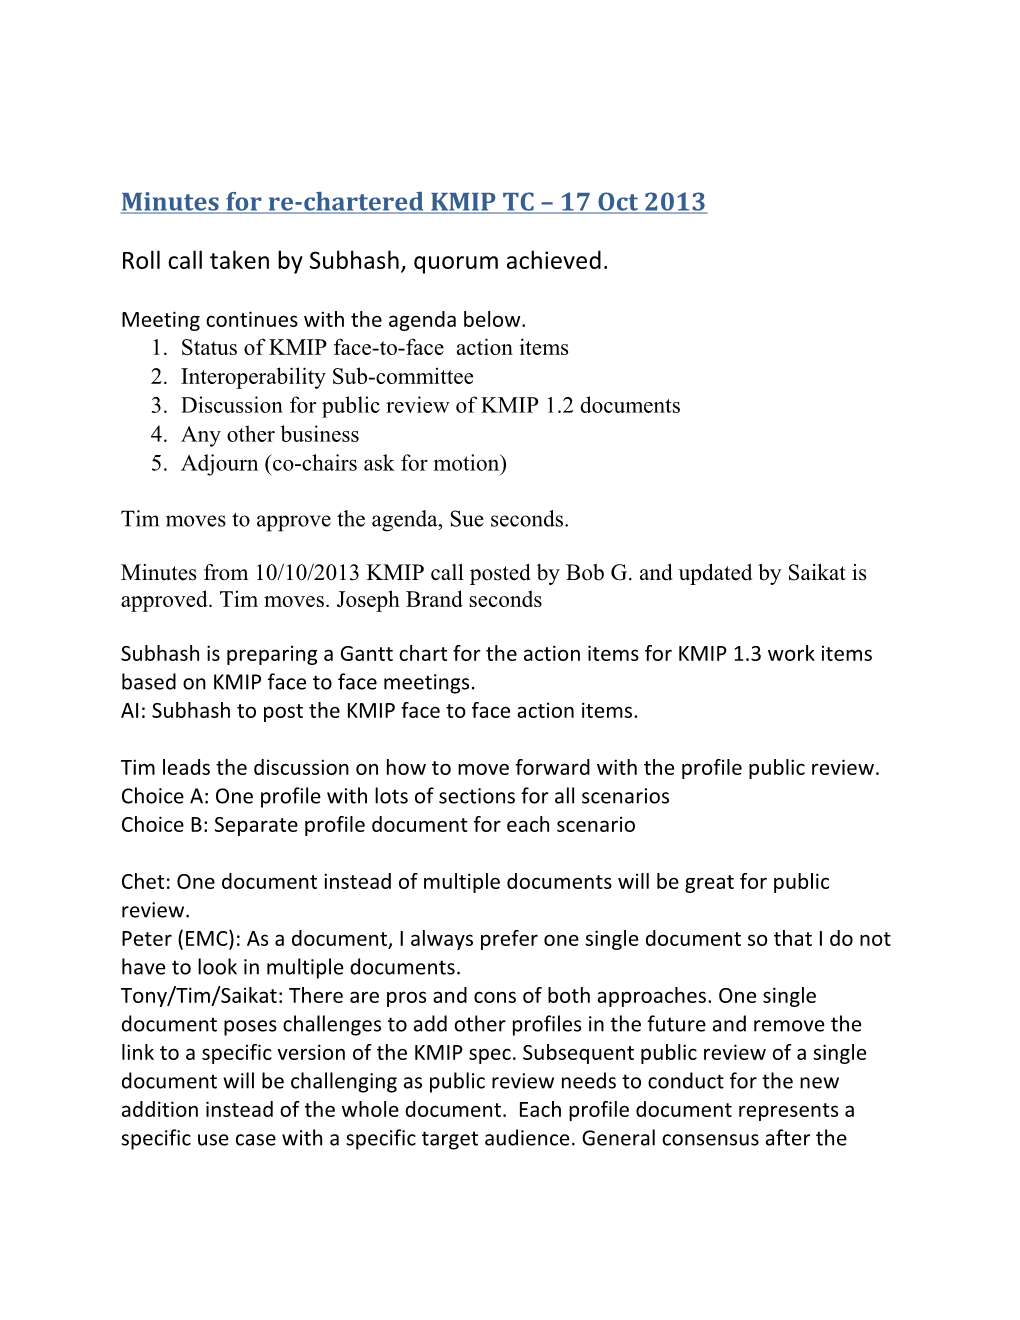 Minutes for Re-Chartered KMIP TC 17 Oct 2013